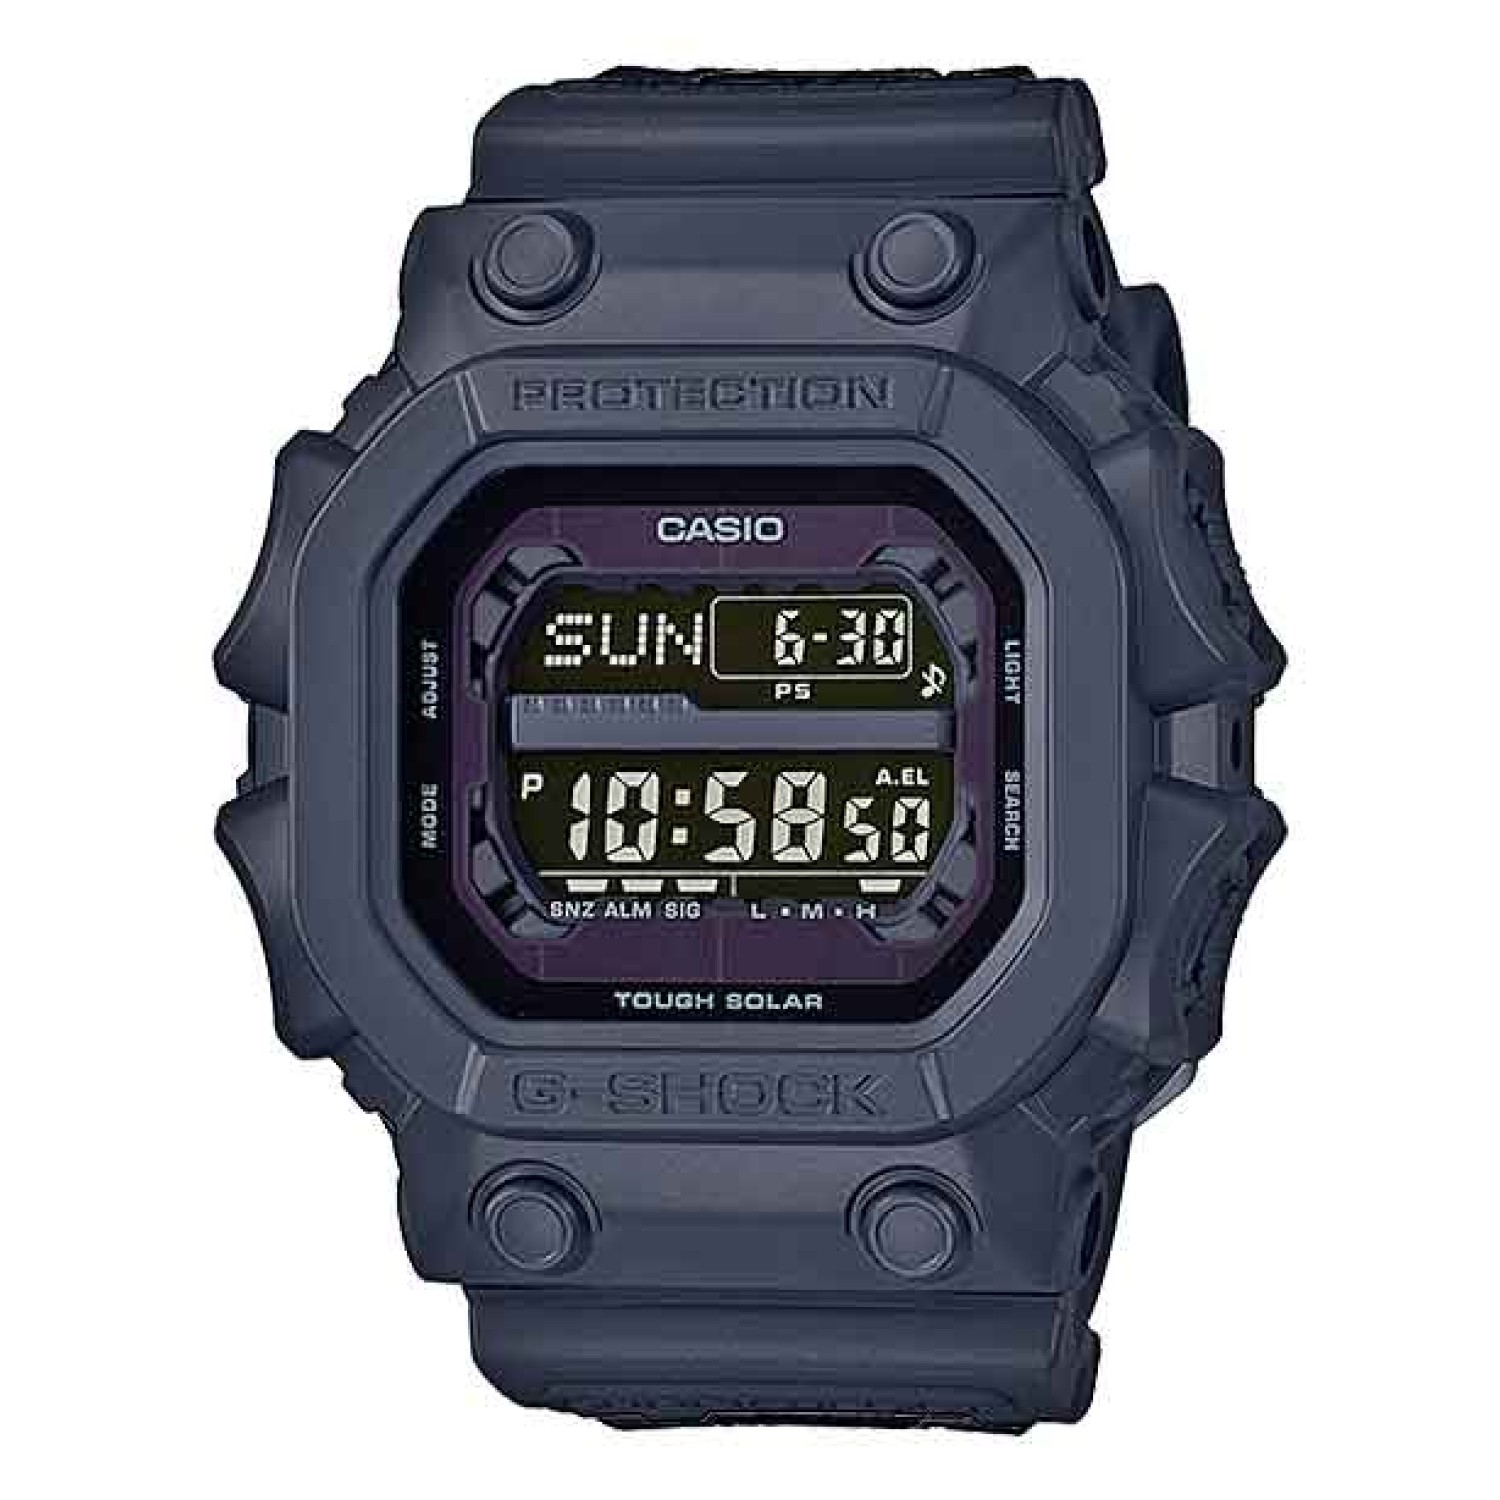 GX56BB-1 G-SHOCK Basic Black Series. From G-SHOCK, the watch that sets the standard for timekeeping toughness, comes the latest models to feature basic G-SHOCK black that captures the essence of one-tone resin. This model is based on the GX-56, which is d